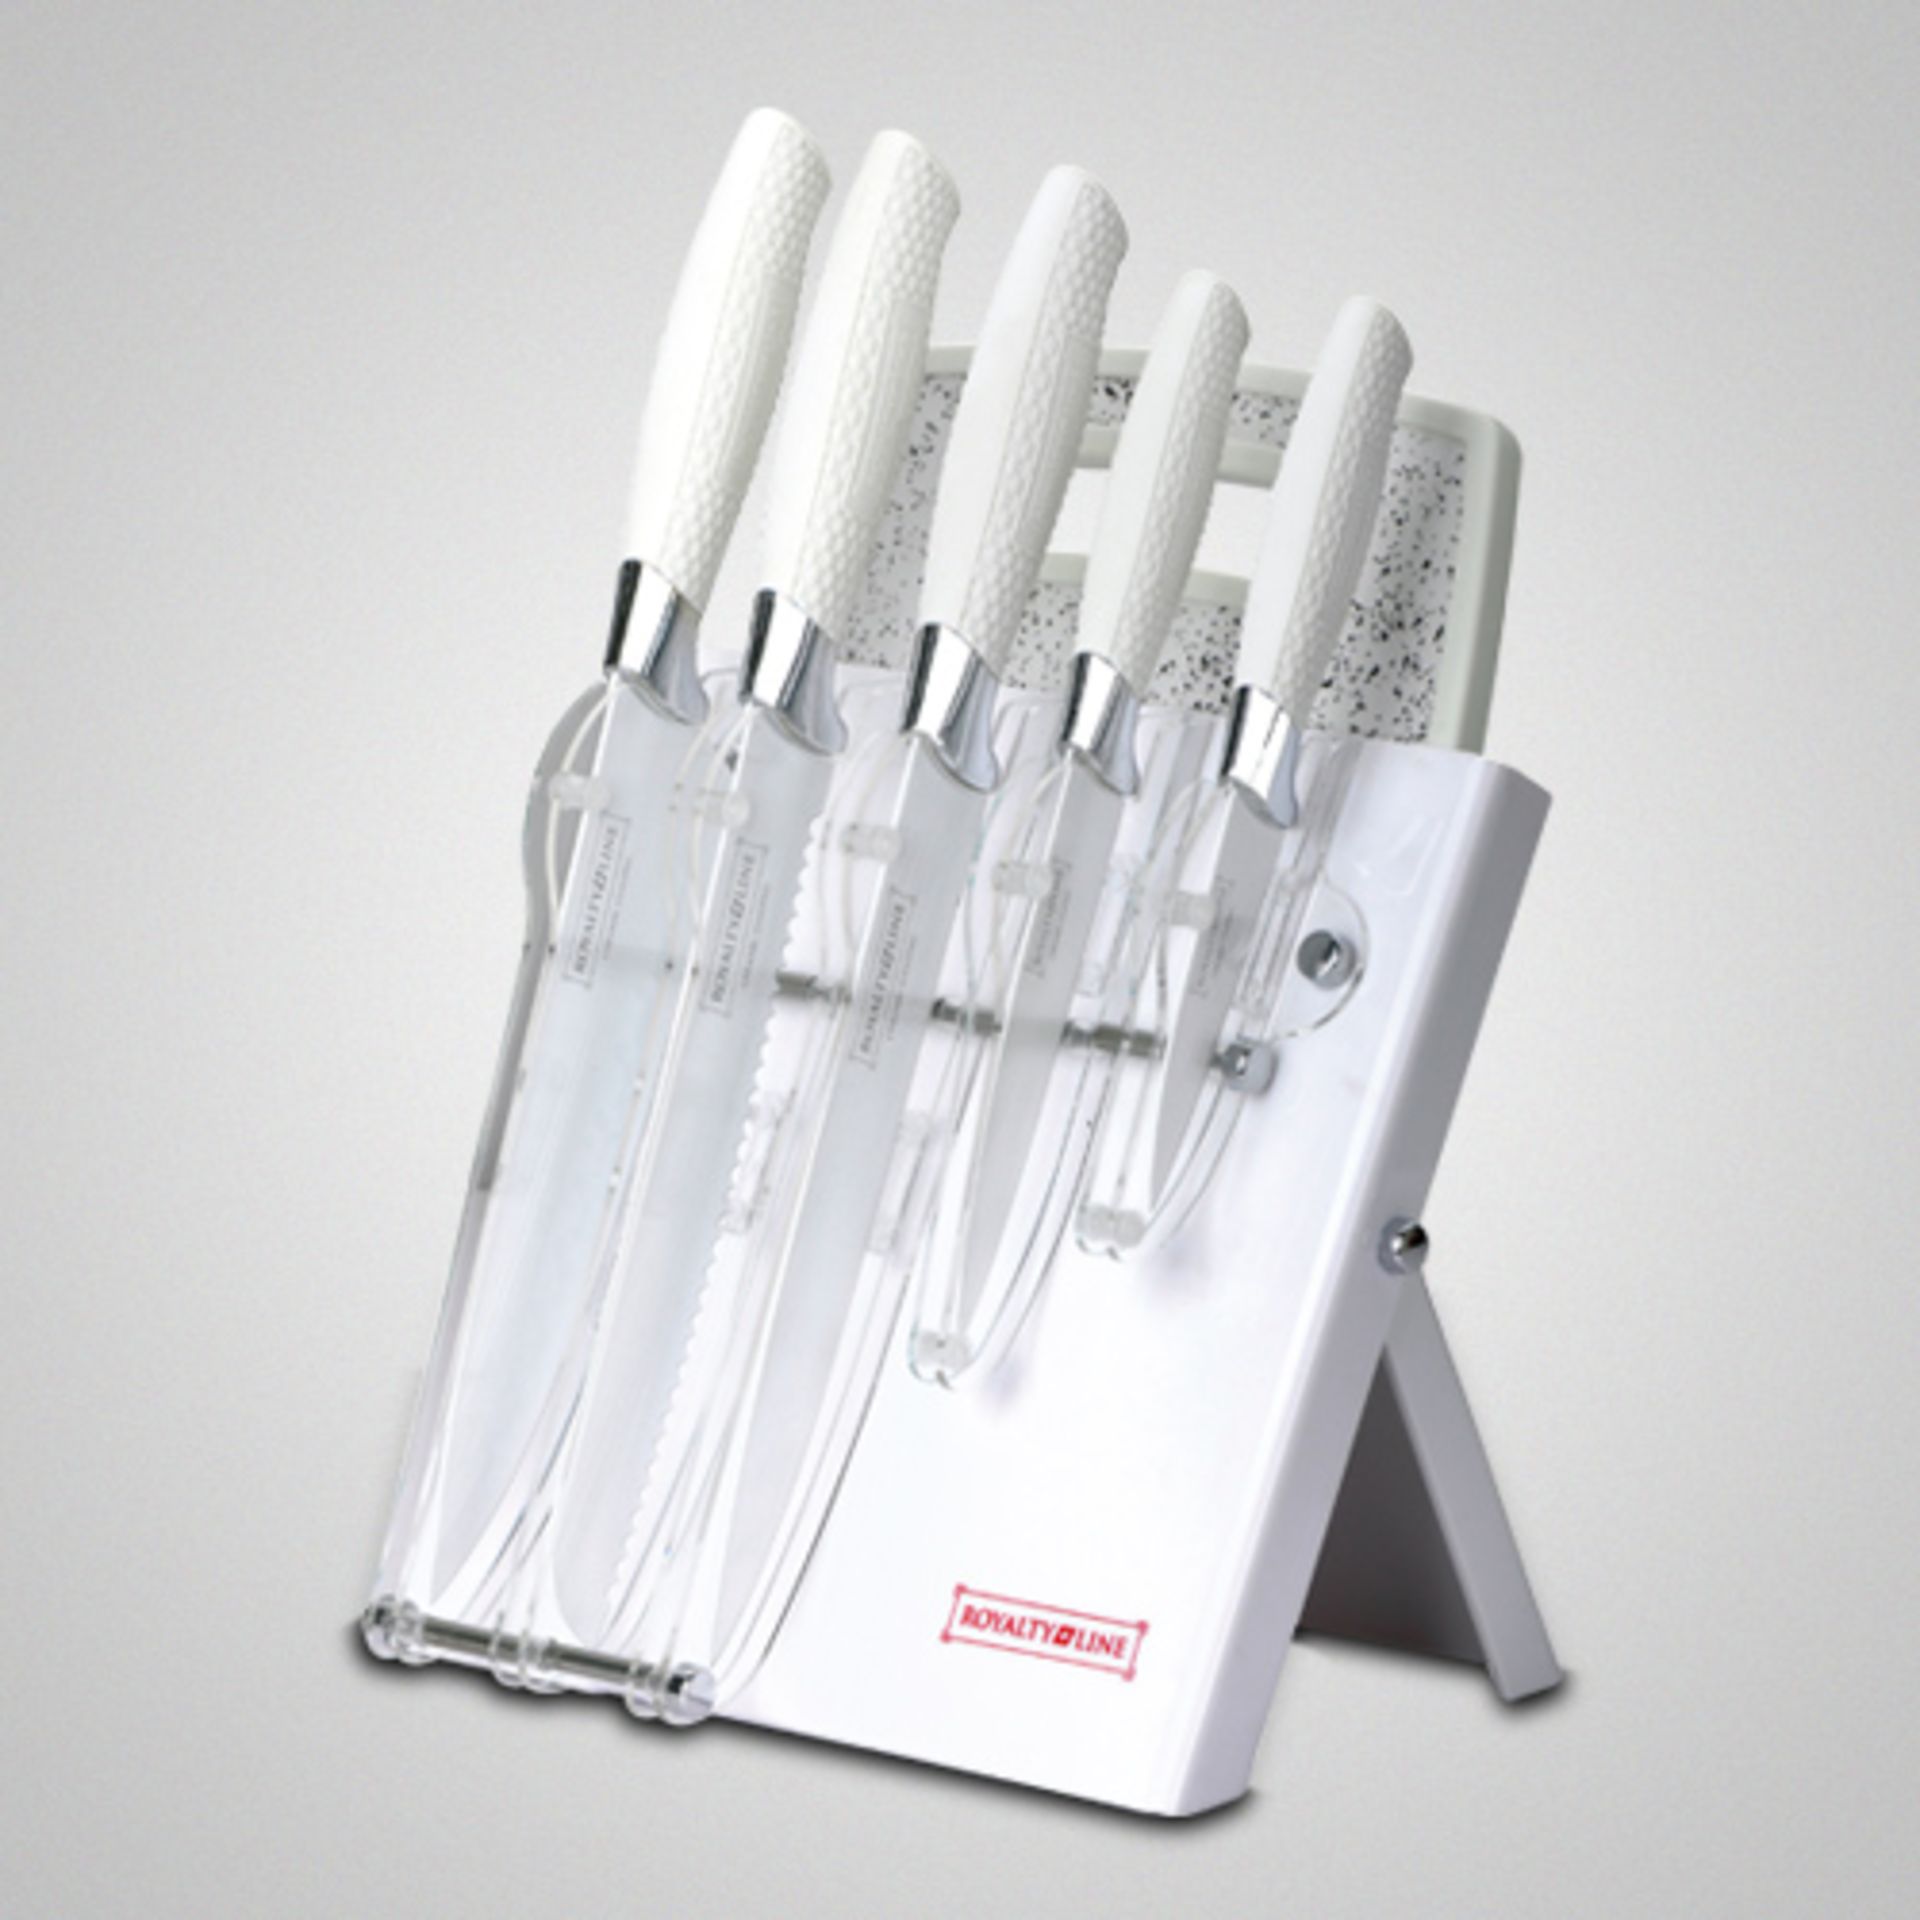 V Brand New 7 Piece White Knife Set With Acrylic Stand And Cutting Board RRP149 Euros X 2 Bid